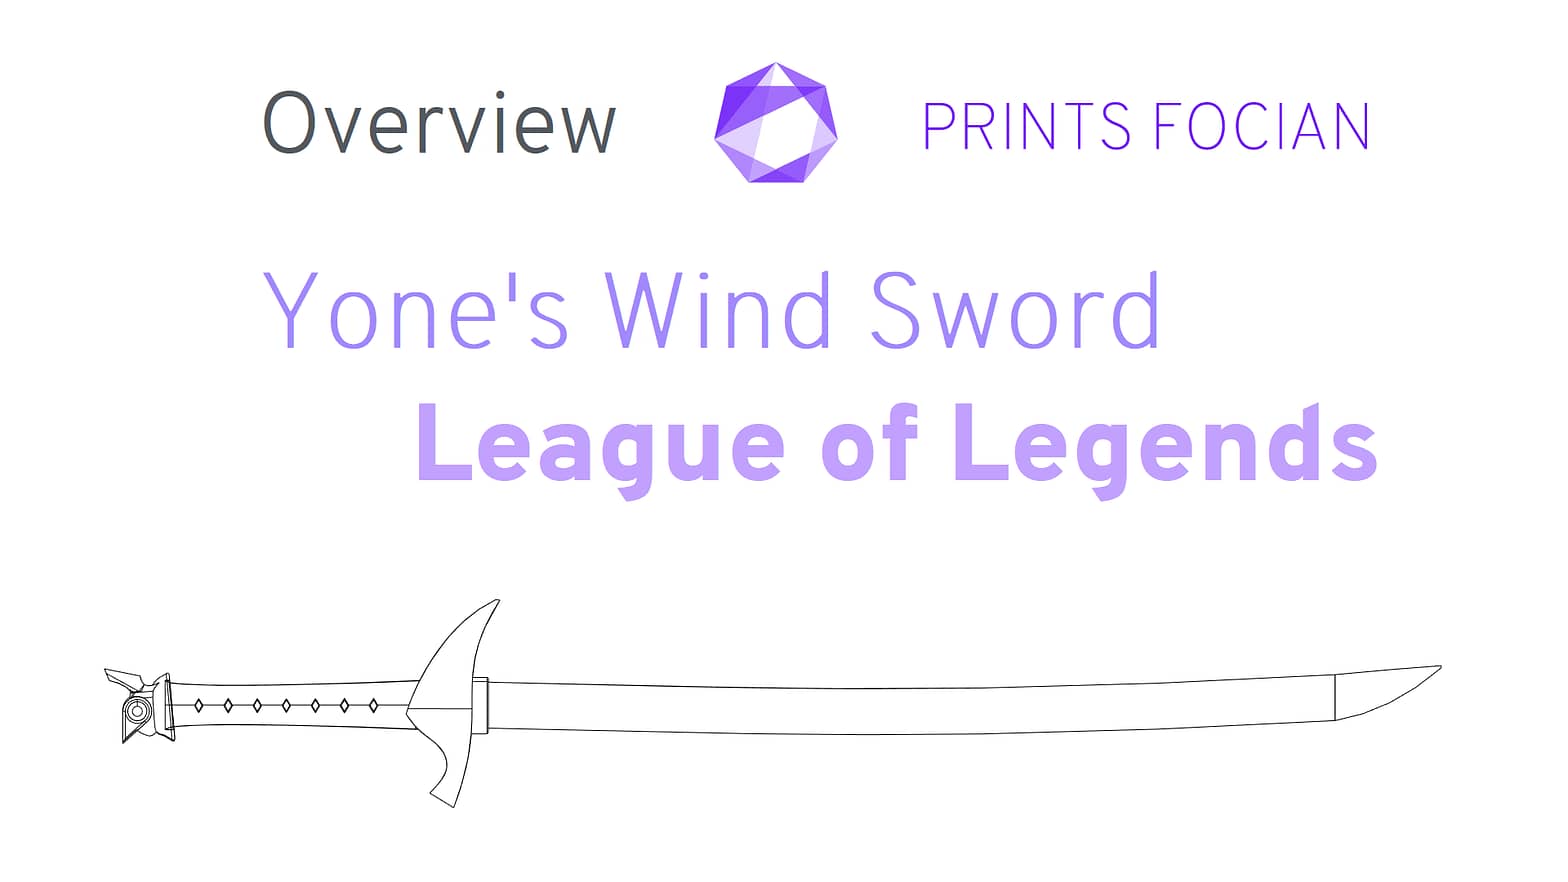 Wireframe image of a Yones Wind Sword on a white background. Prints Focian Icon top and central. Text: Purple Prints Focian, Yones Wind Sword, League of Legends and dark grey Overview.